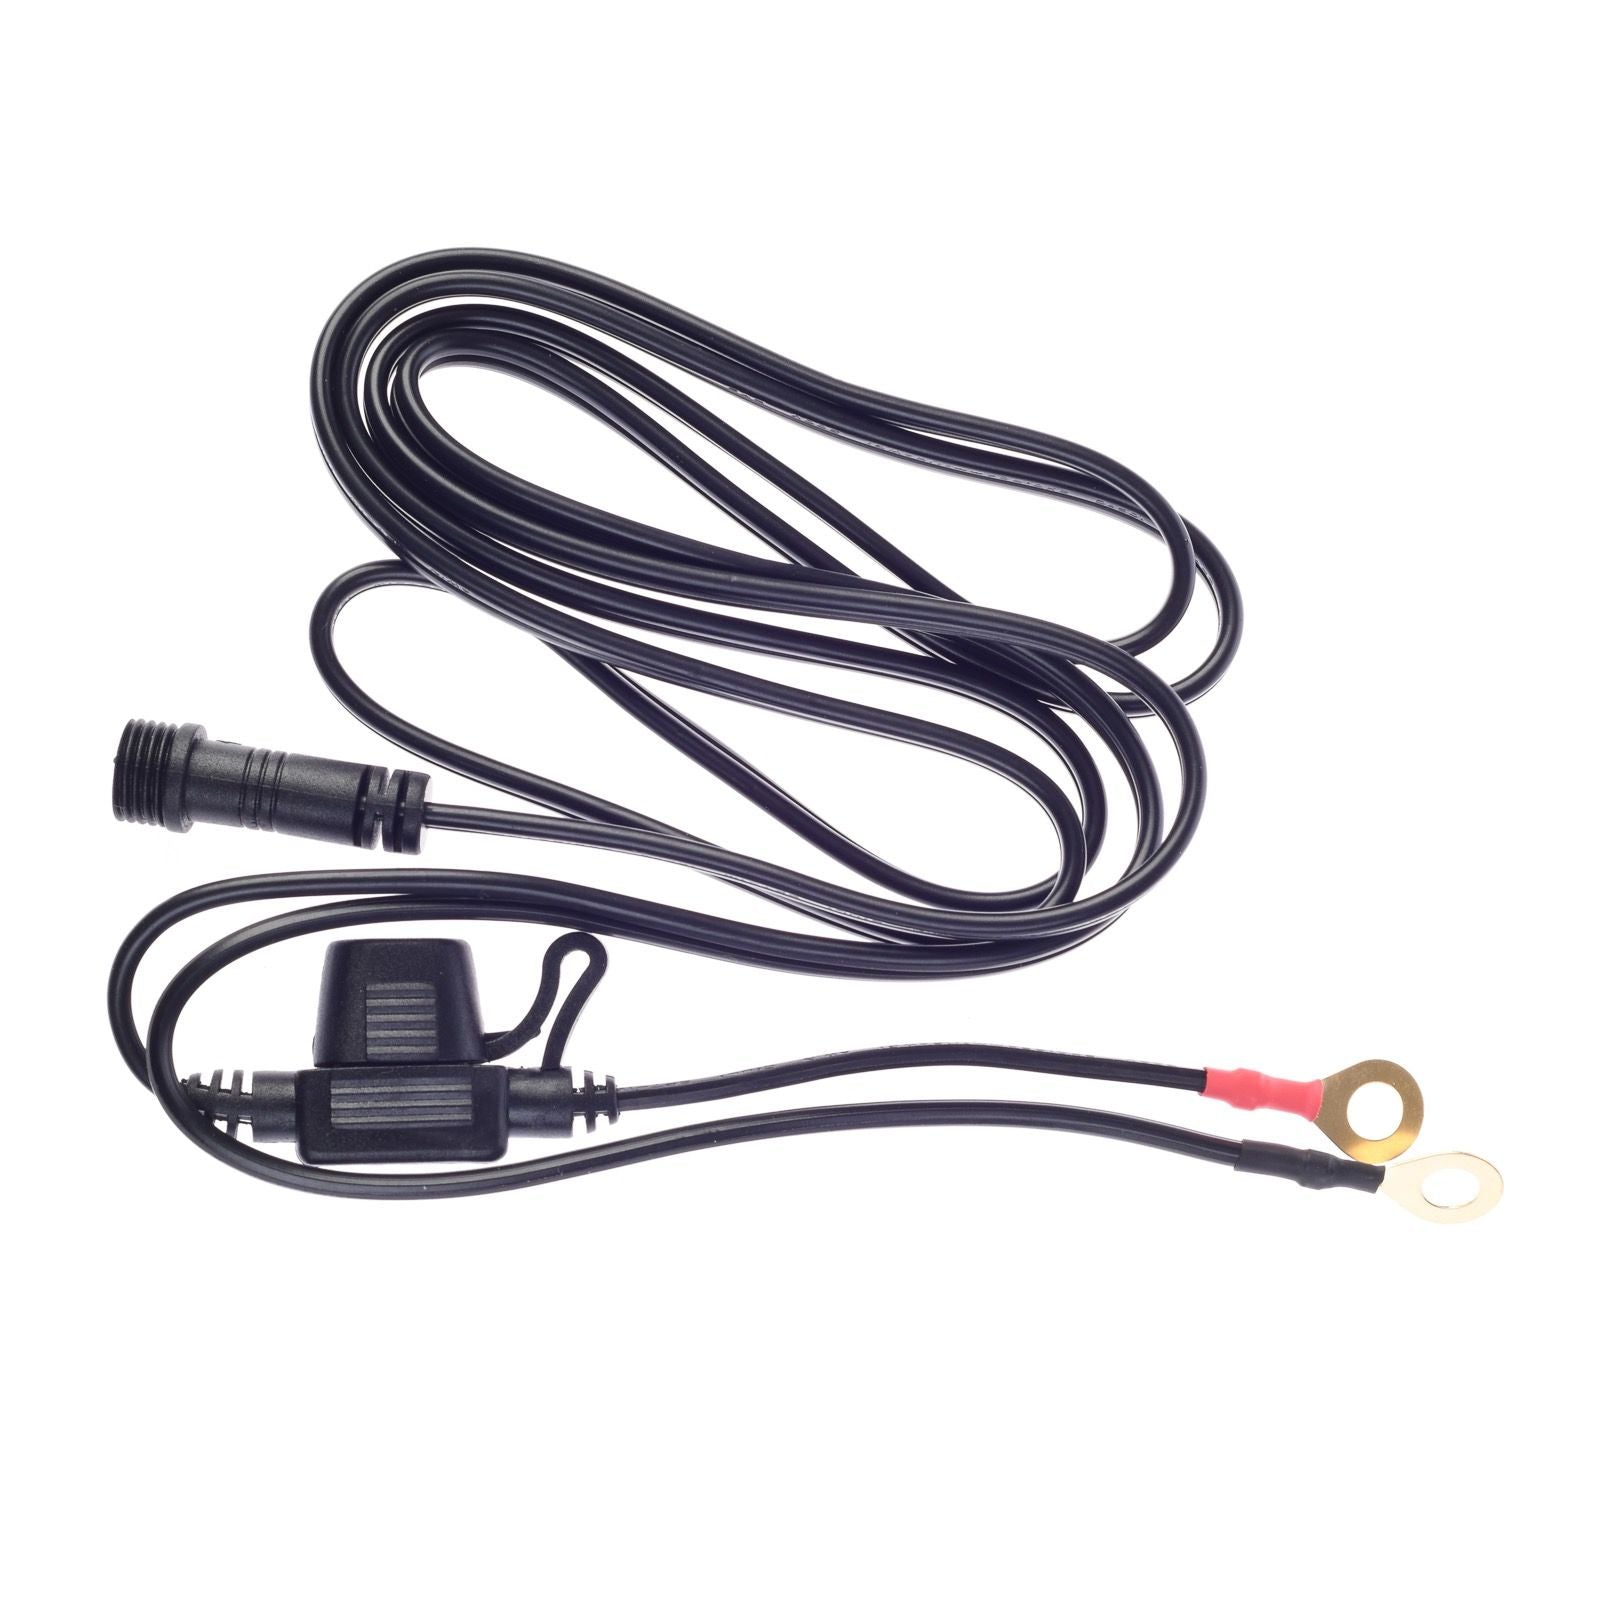 New OXFORD V9 EVO Hotgrips Replacement Fused Wiring Loom (Road) #OXEL420L